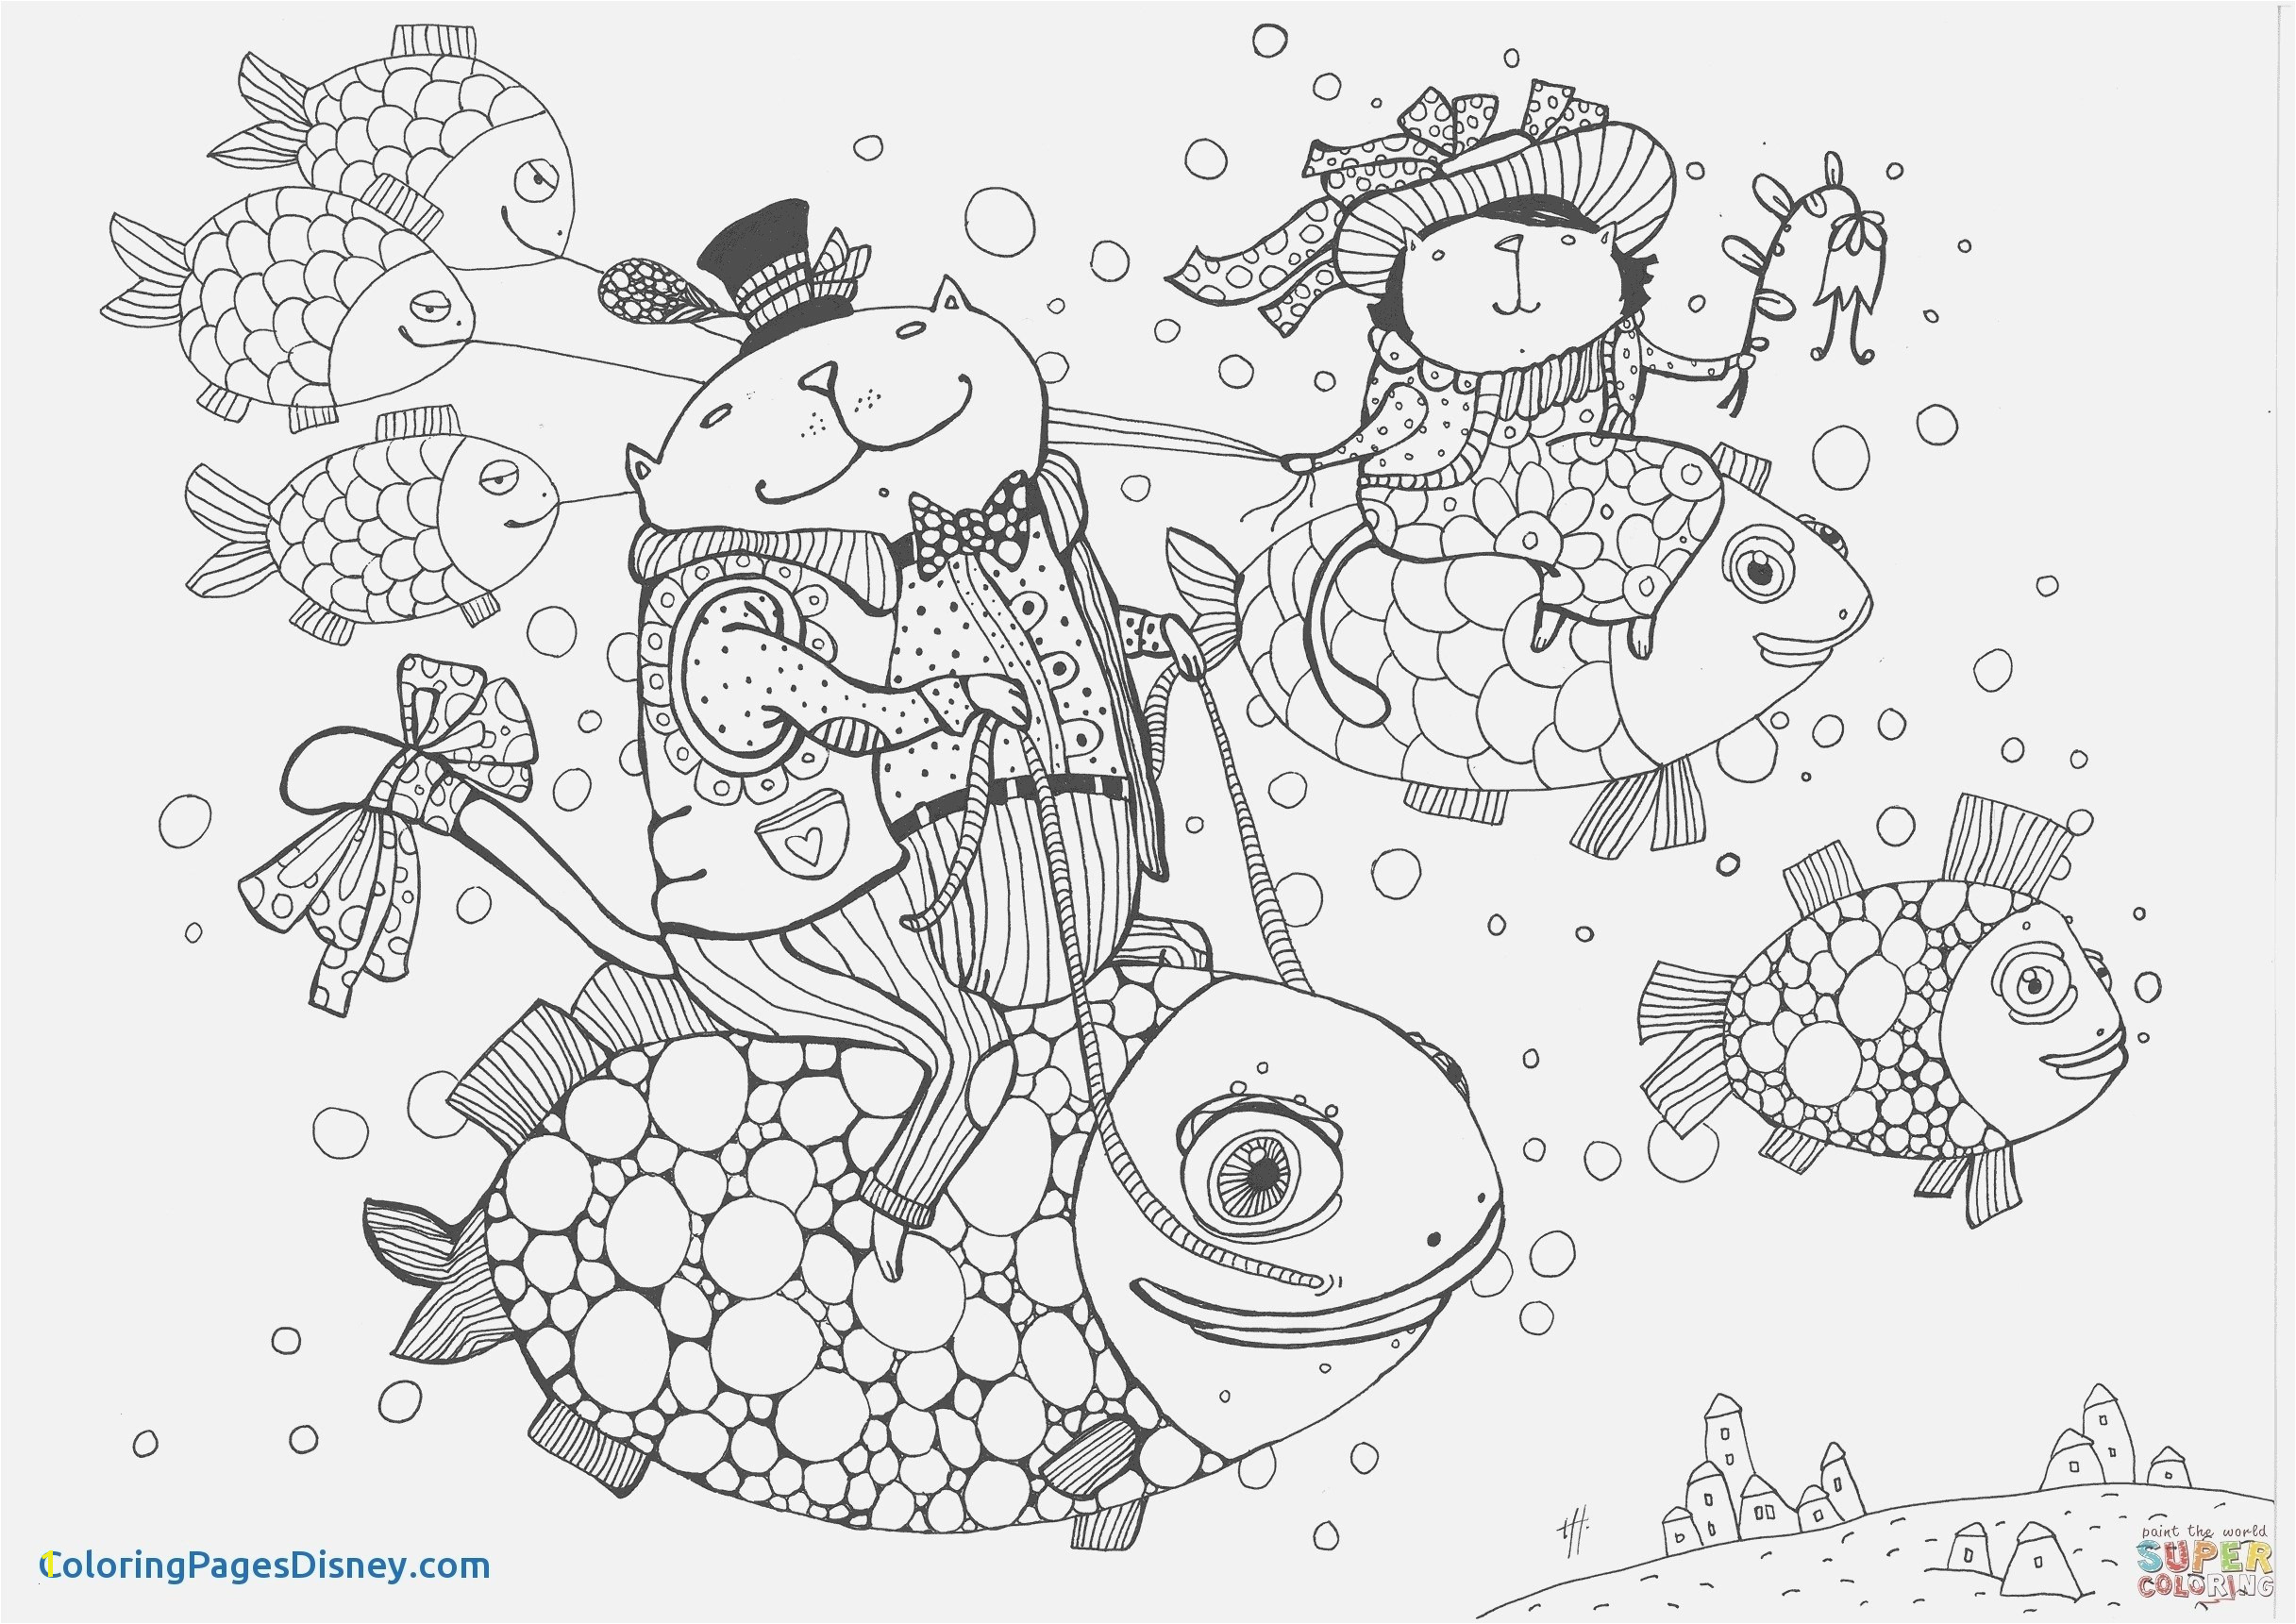 Problem solving Coloring Pages Fresh Free Dog Coloring Pages Elegant buttercup Coloring Pages Lovely Cool